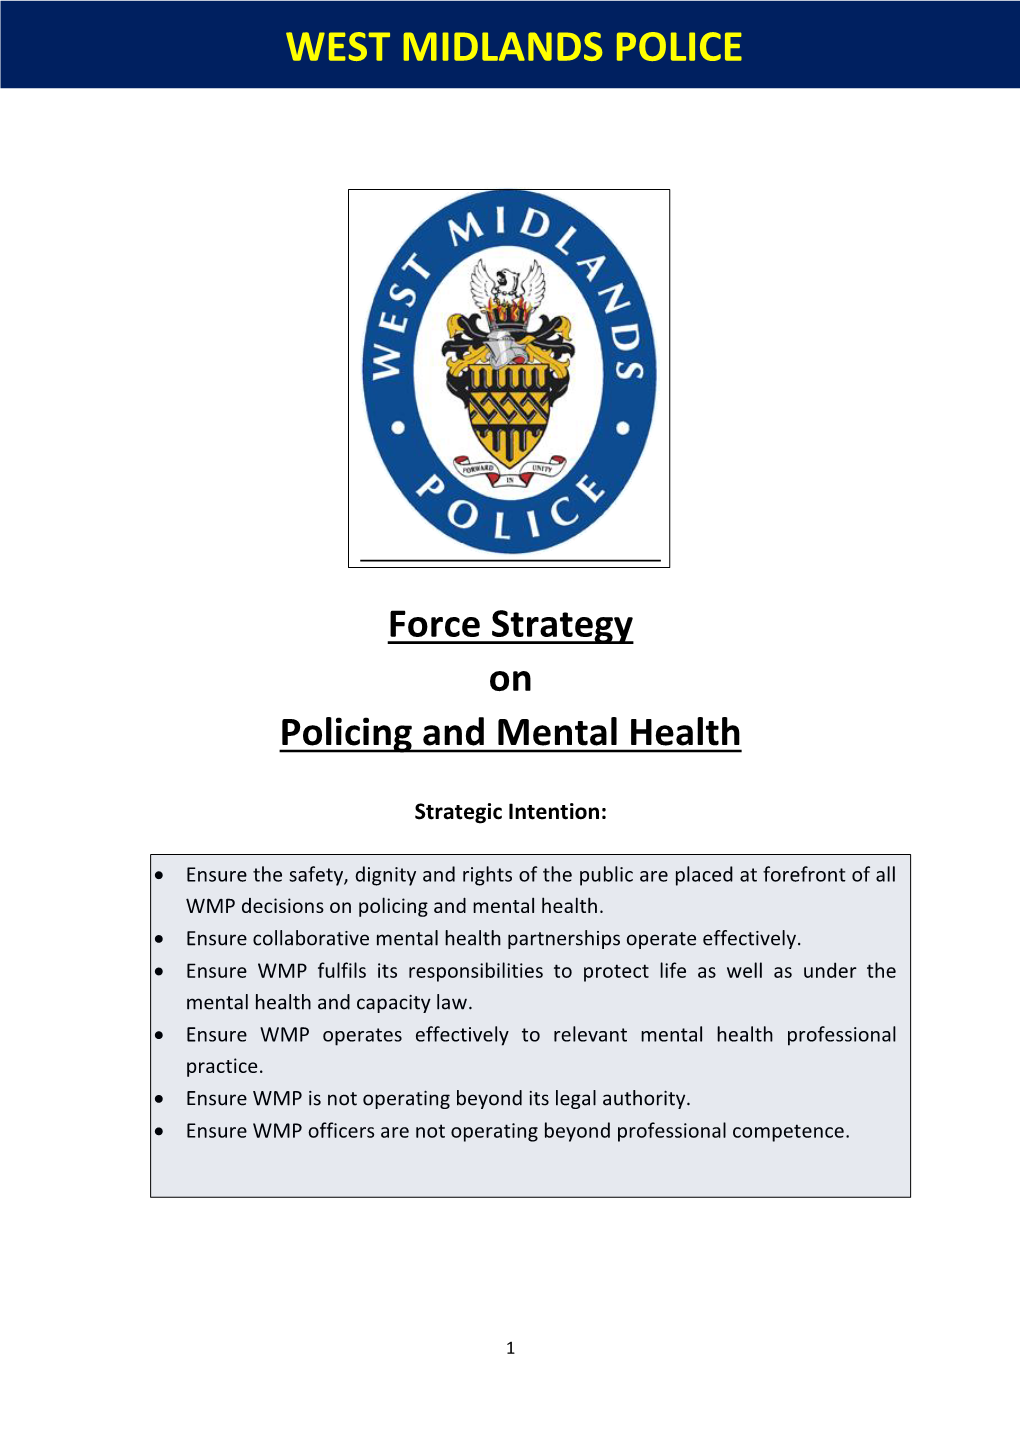 Force Strategy on Policing and Mental Health